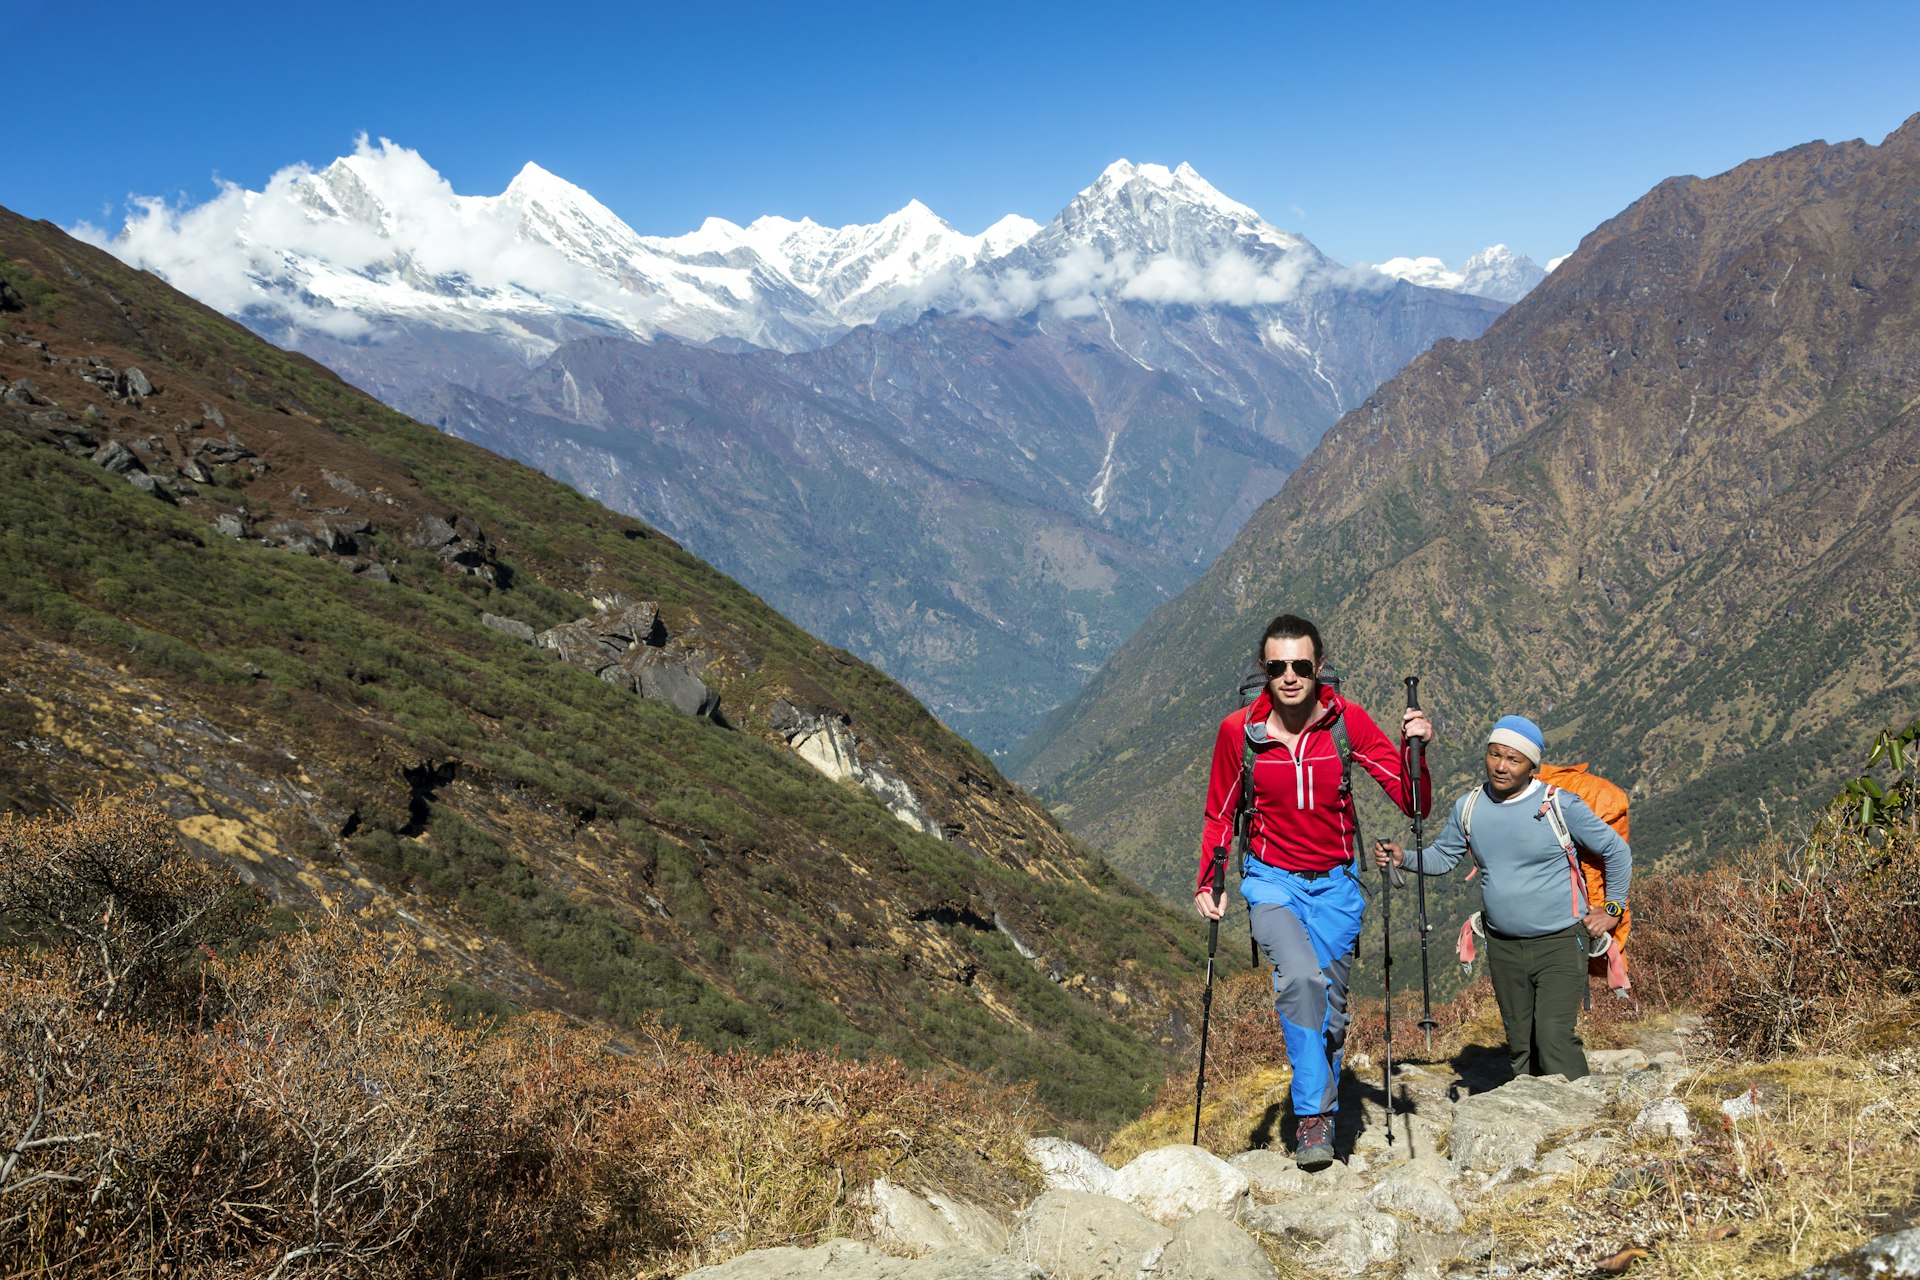 A hiker walking on a mountain trail along with local guide, Nepal, Asia